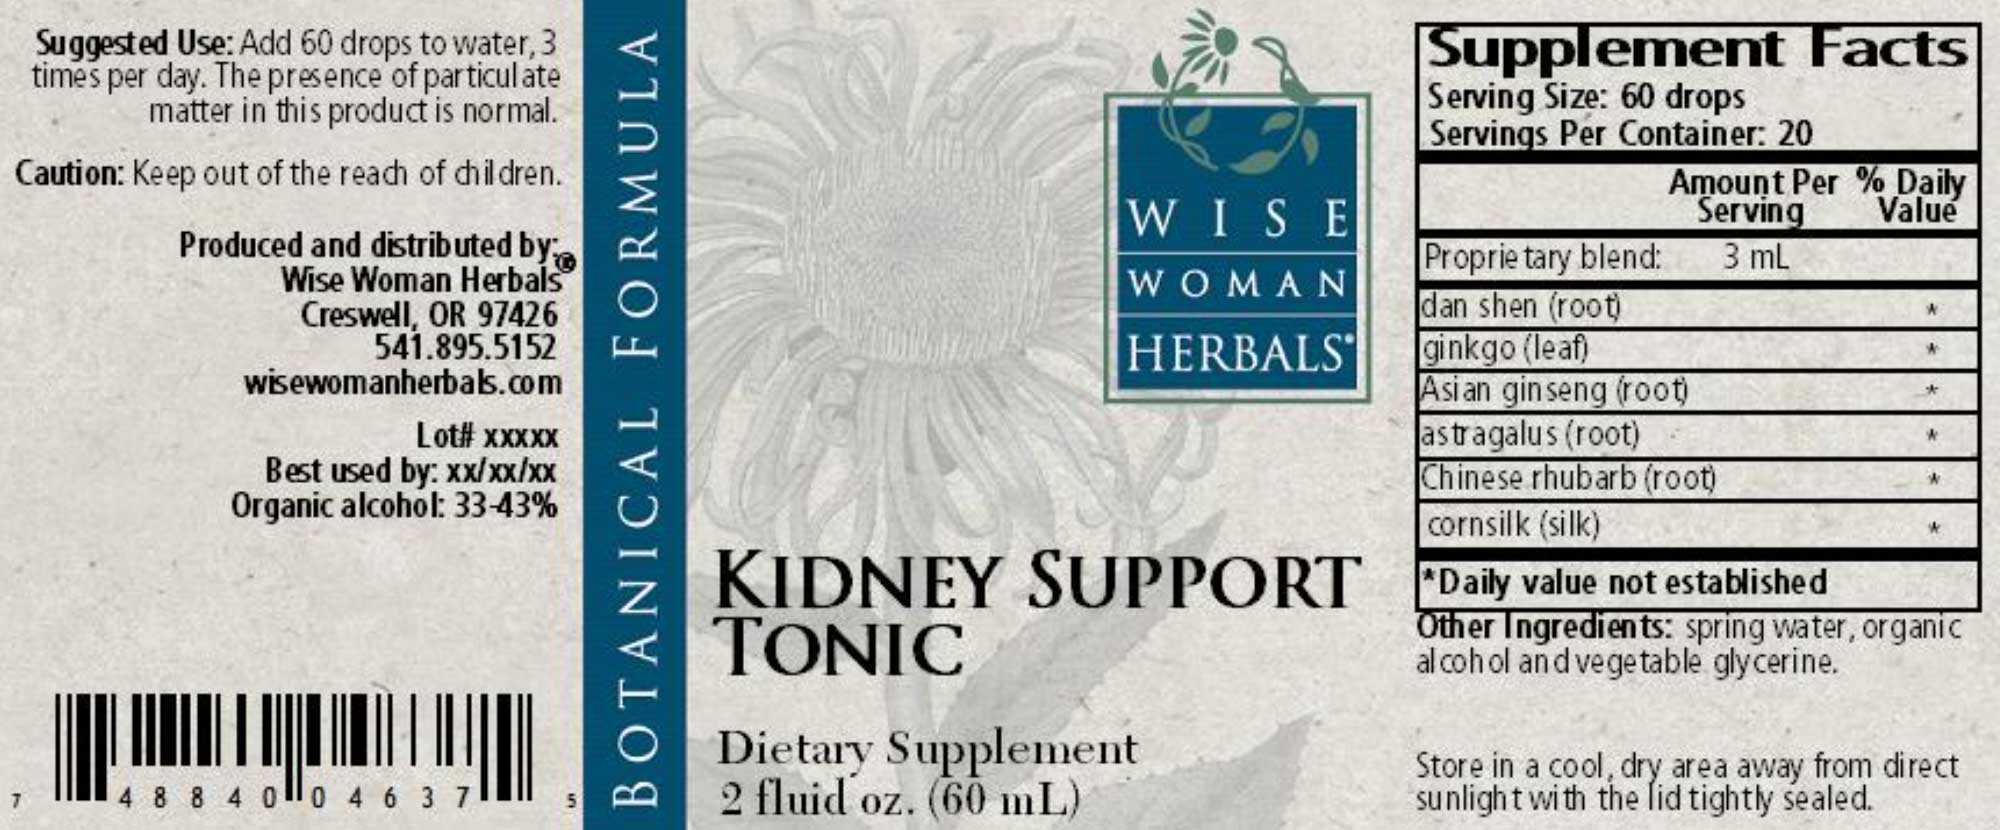 Wise Woman Herbals Kidney Support Label